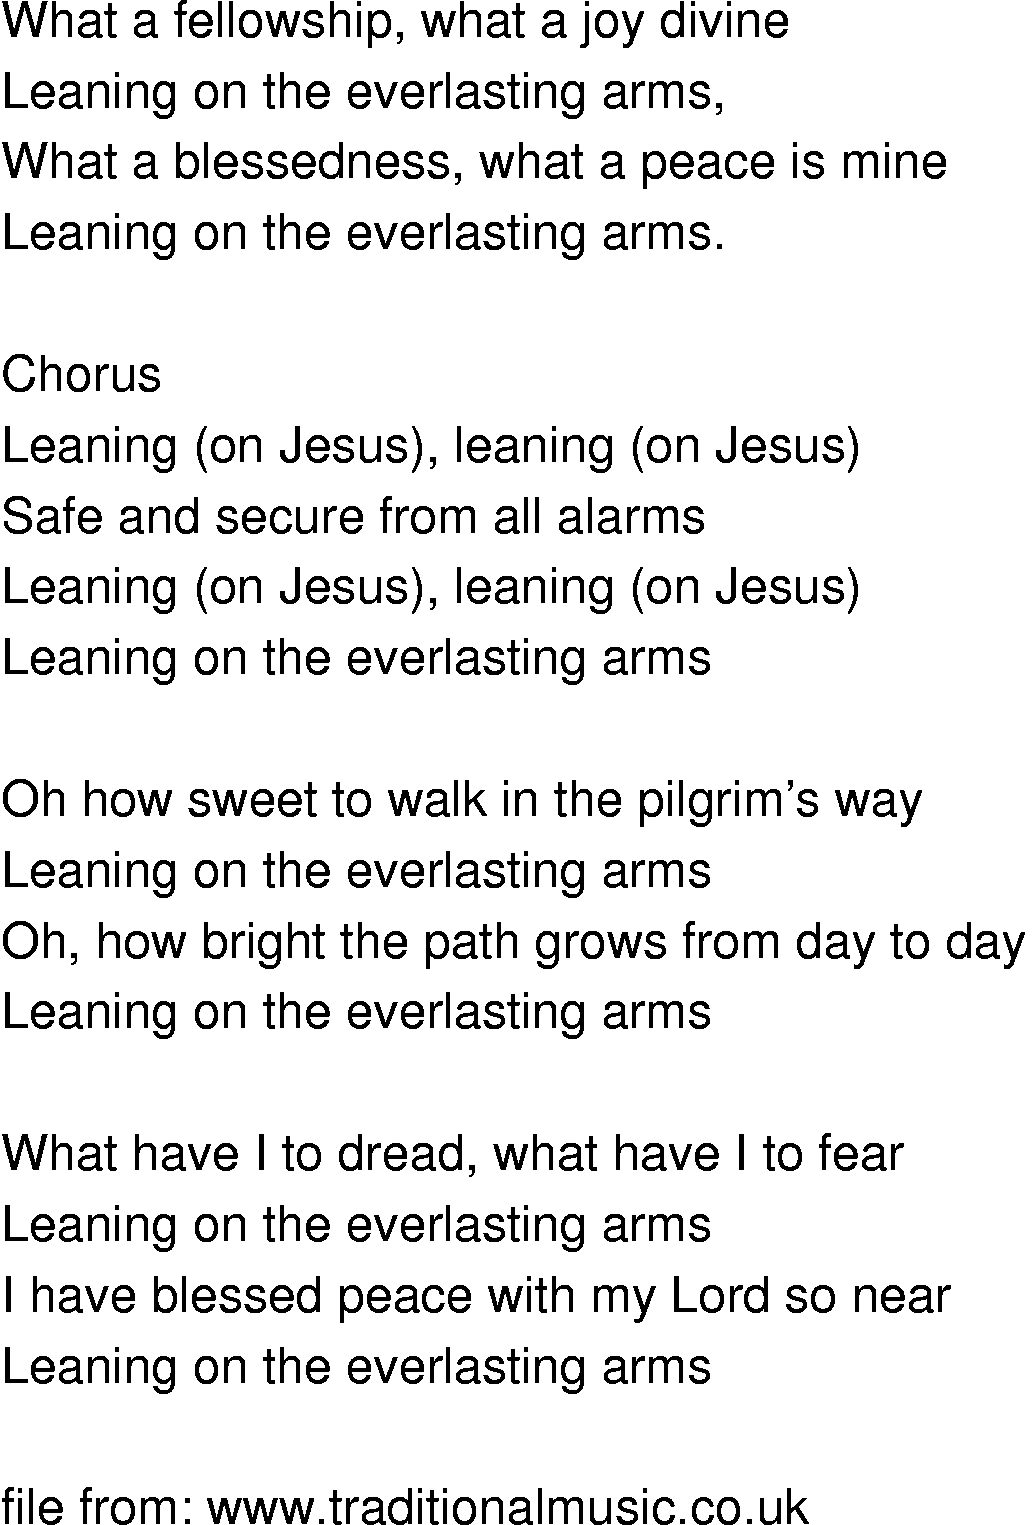 Old-Time (oldtimey) Song Lyrics - leaning on the everlasting arms